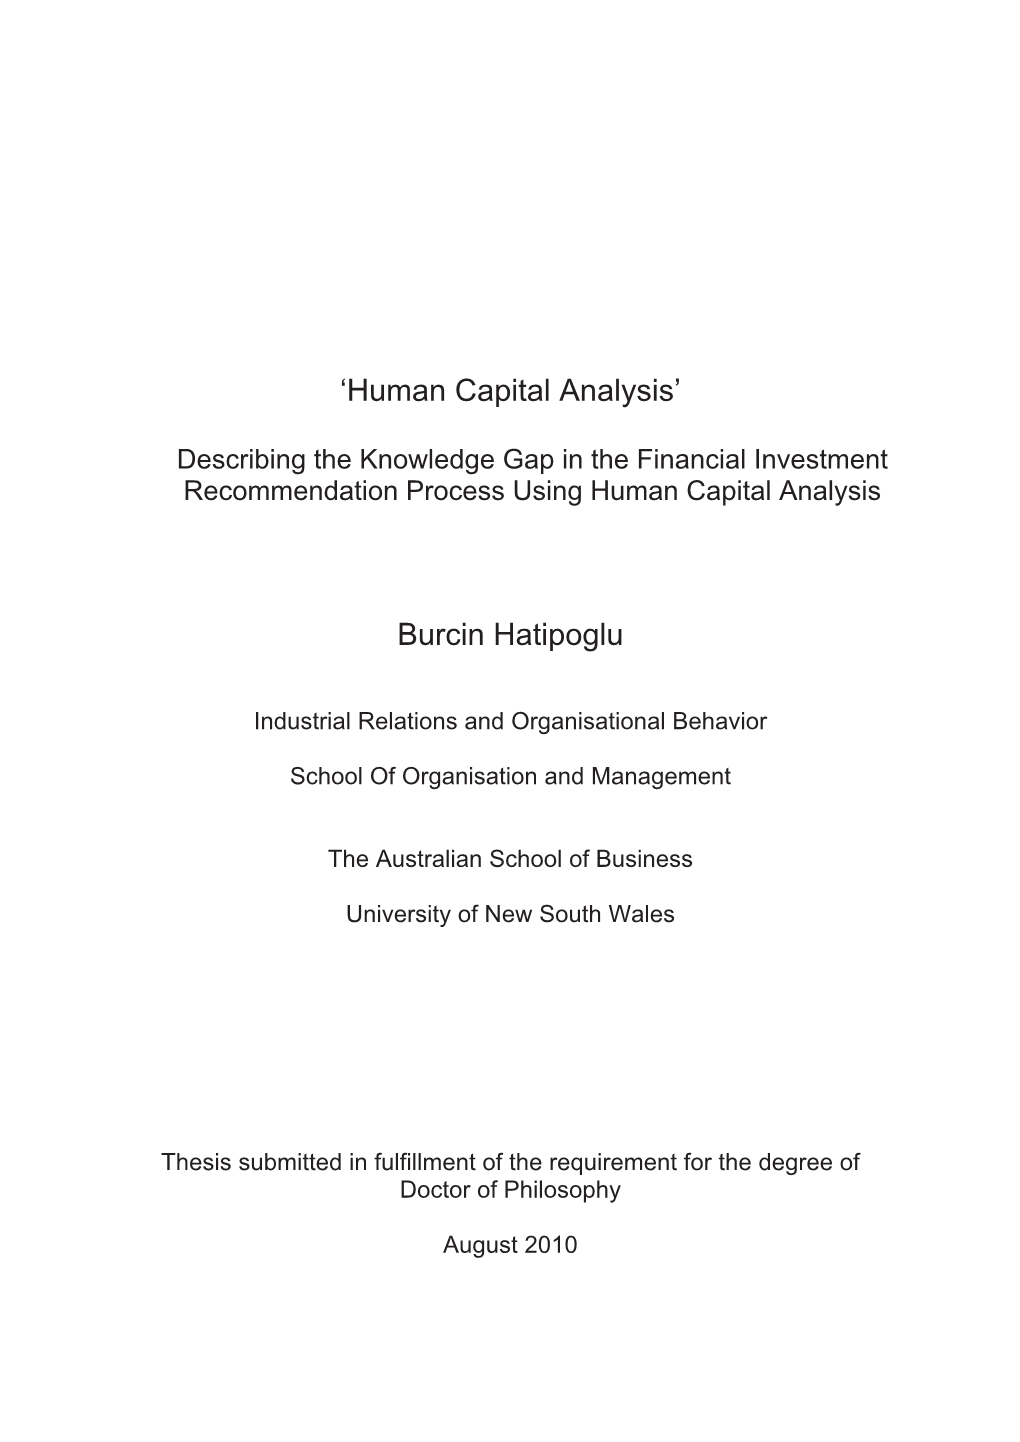 Human Capital in the Human Resource Management Literature...11 2.1 Introduction